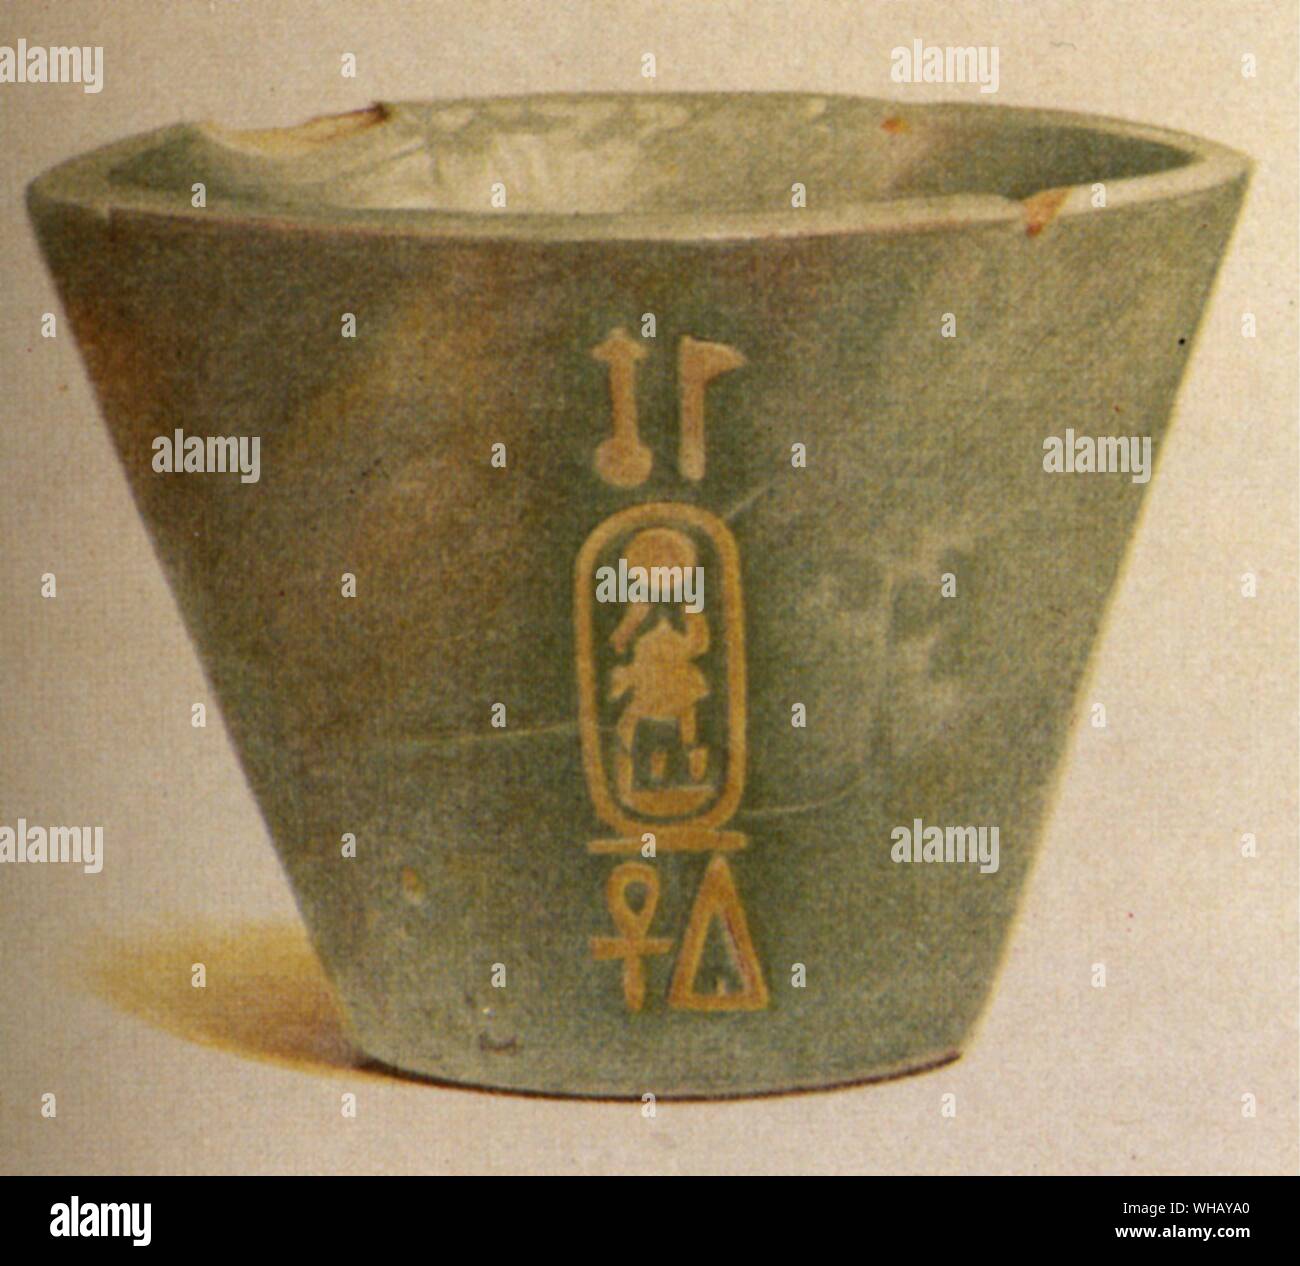 The blue green faience cup of Tutankhamen found by Ayrton under a boulder in the gully containing Amenhotep II's tomb. Tutankhamun (alternate transcription Tutankhamen), named Tutankhaten early in his life, was Pharaoh of the Eighteenth dynasty of Egypt (ruled 1334 BC/1333 BC-1323 BC, lived ca. 1341 BC-1323 BC), during the period known as the New Kingdom. Aakheperure Amenhotep II (d. 1400 BC) was the seventh Pharaoh of the 18th dynasty of Egypt. He ruled from 1427 BC to 1400 BC.. Valley of the Kings by John Romer, page 217. Stock Photo